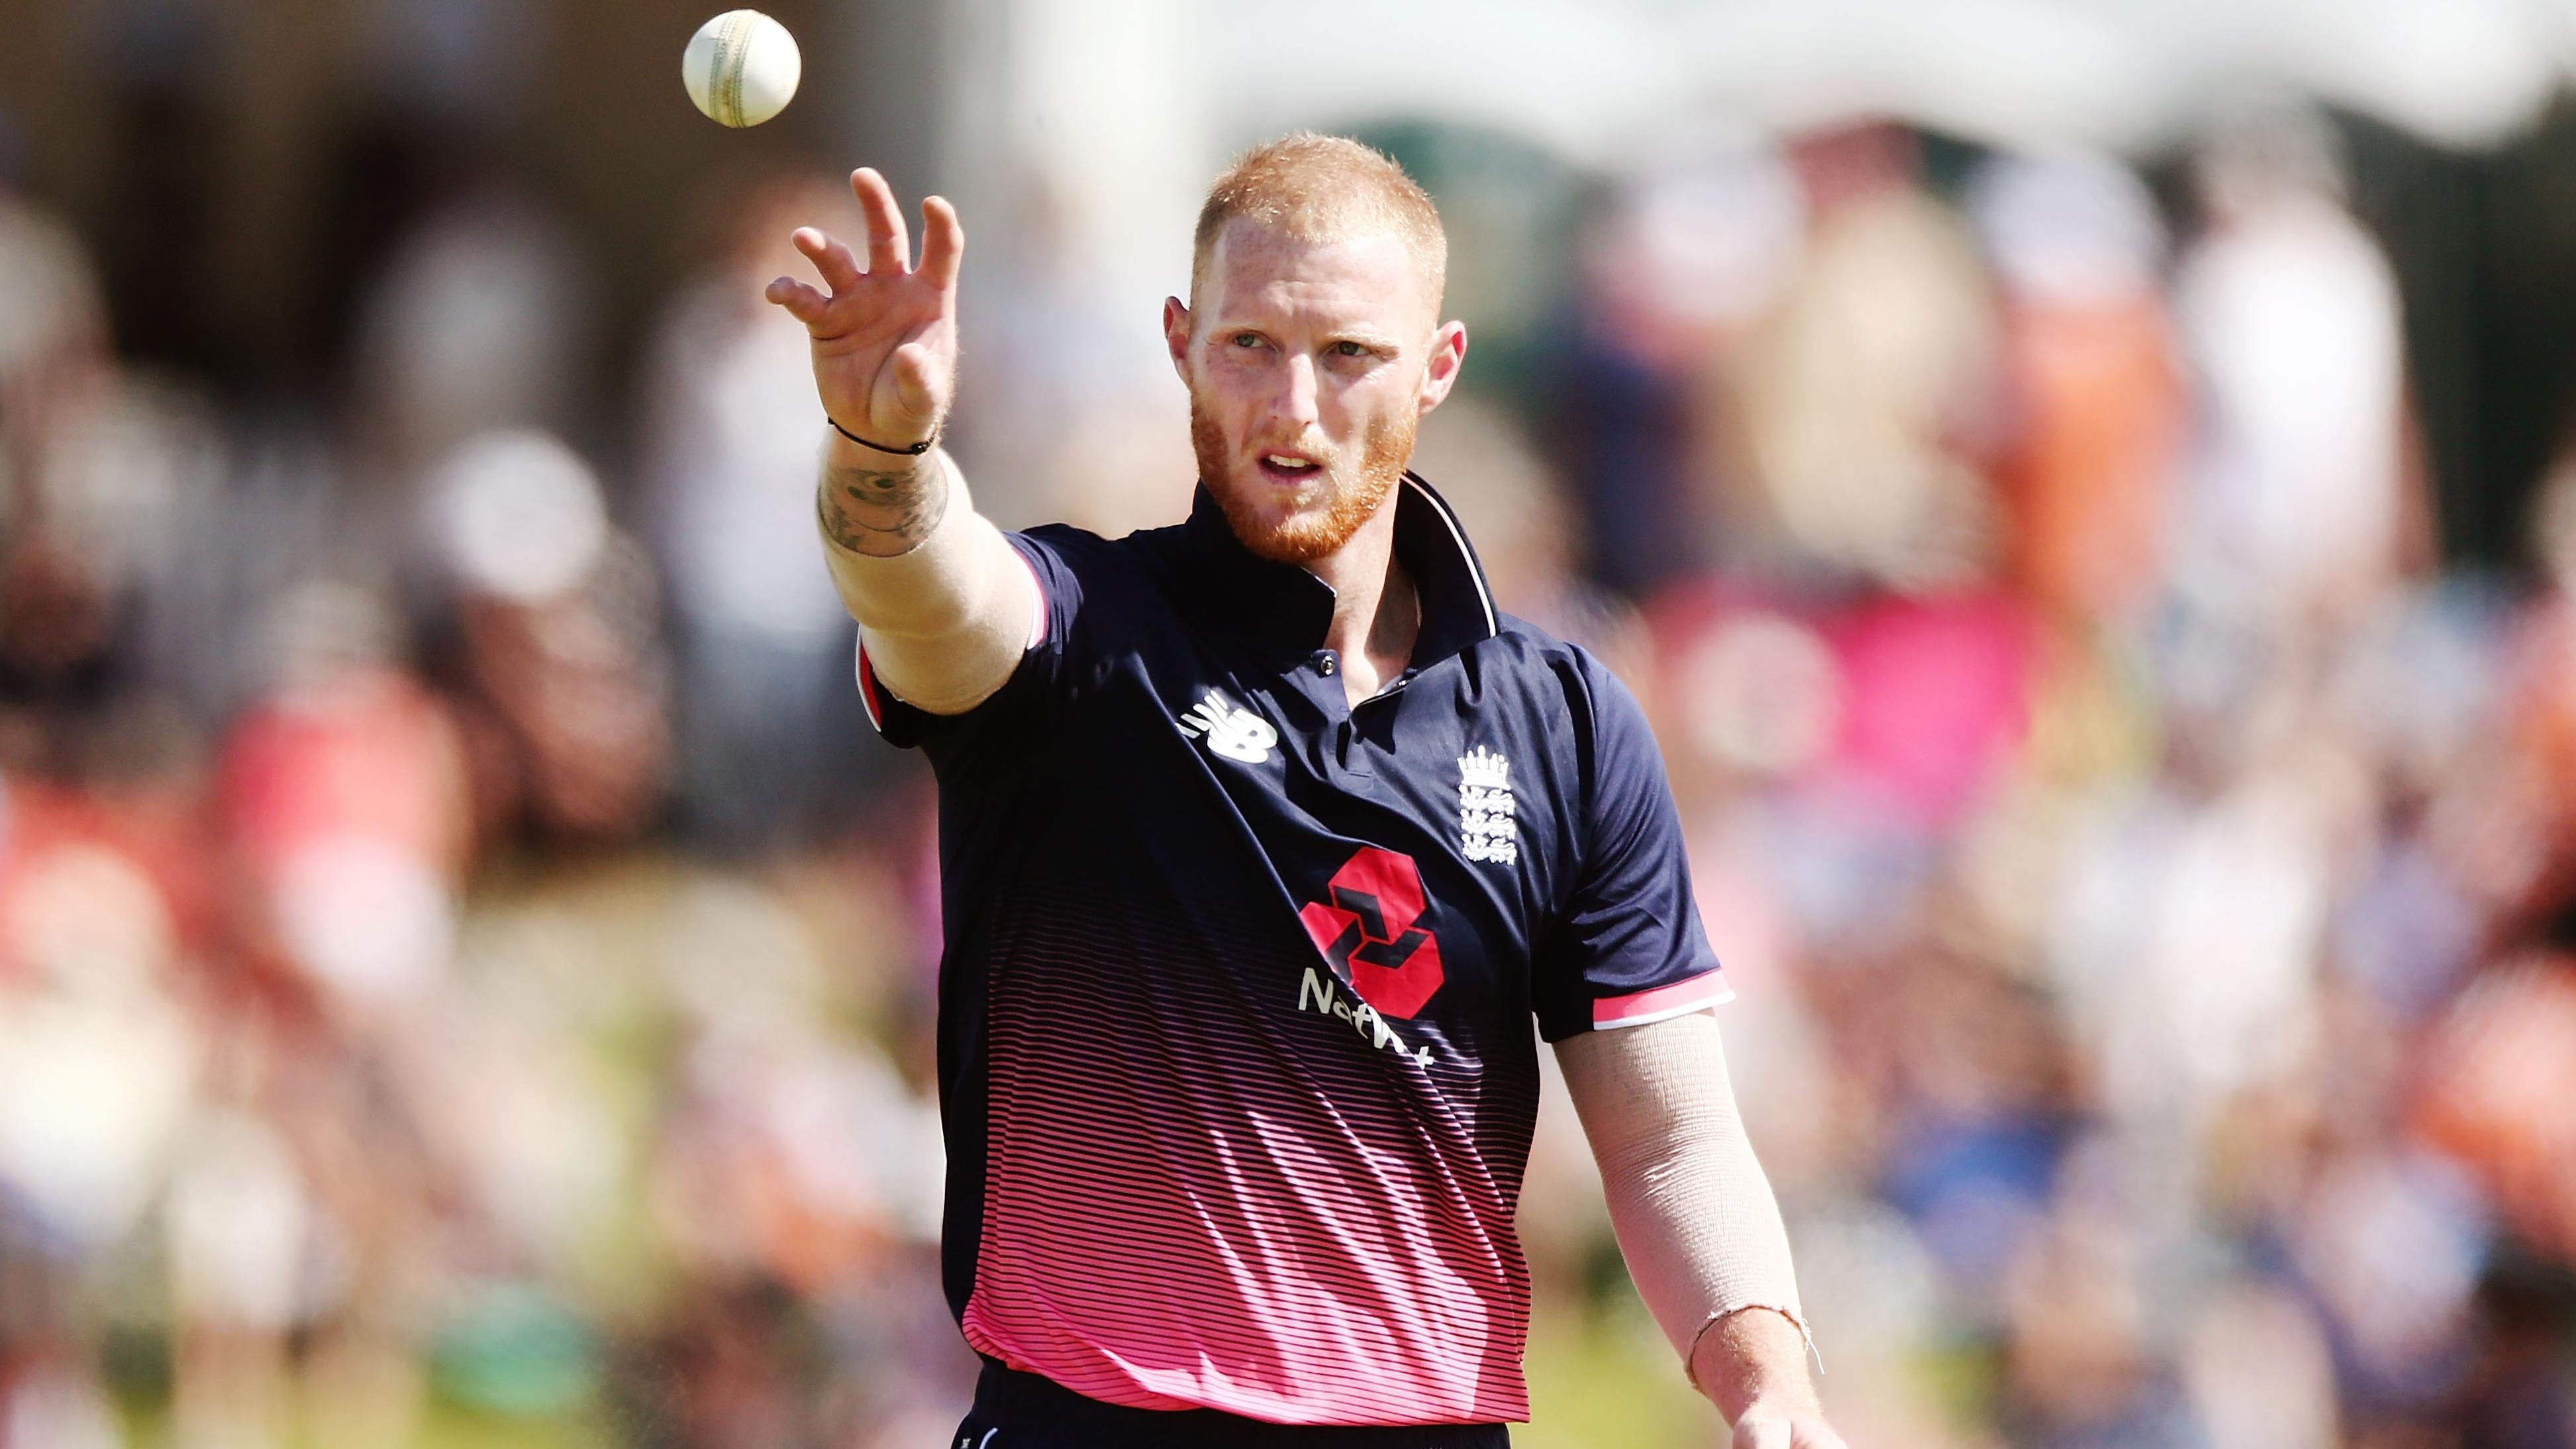 stokes got emotional after comeback in national side against NZ